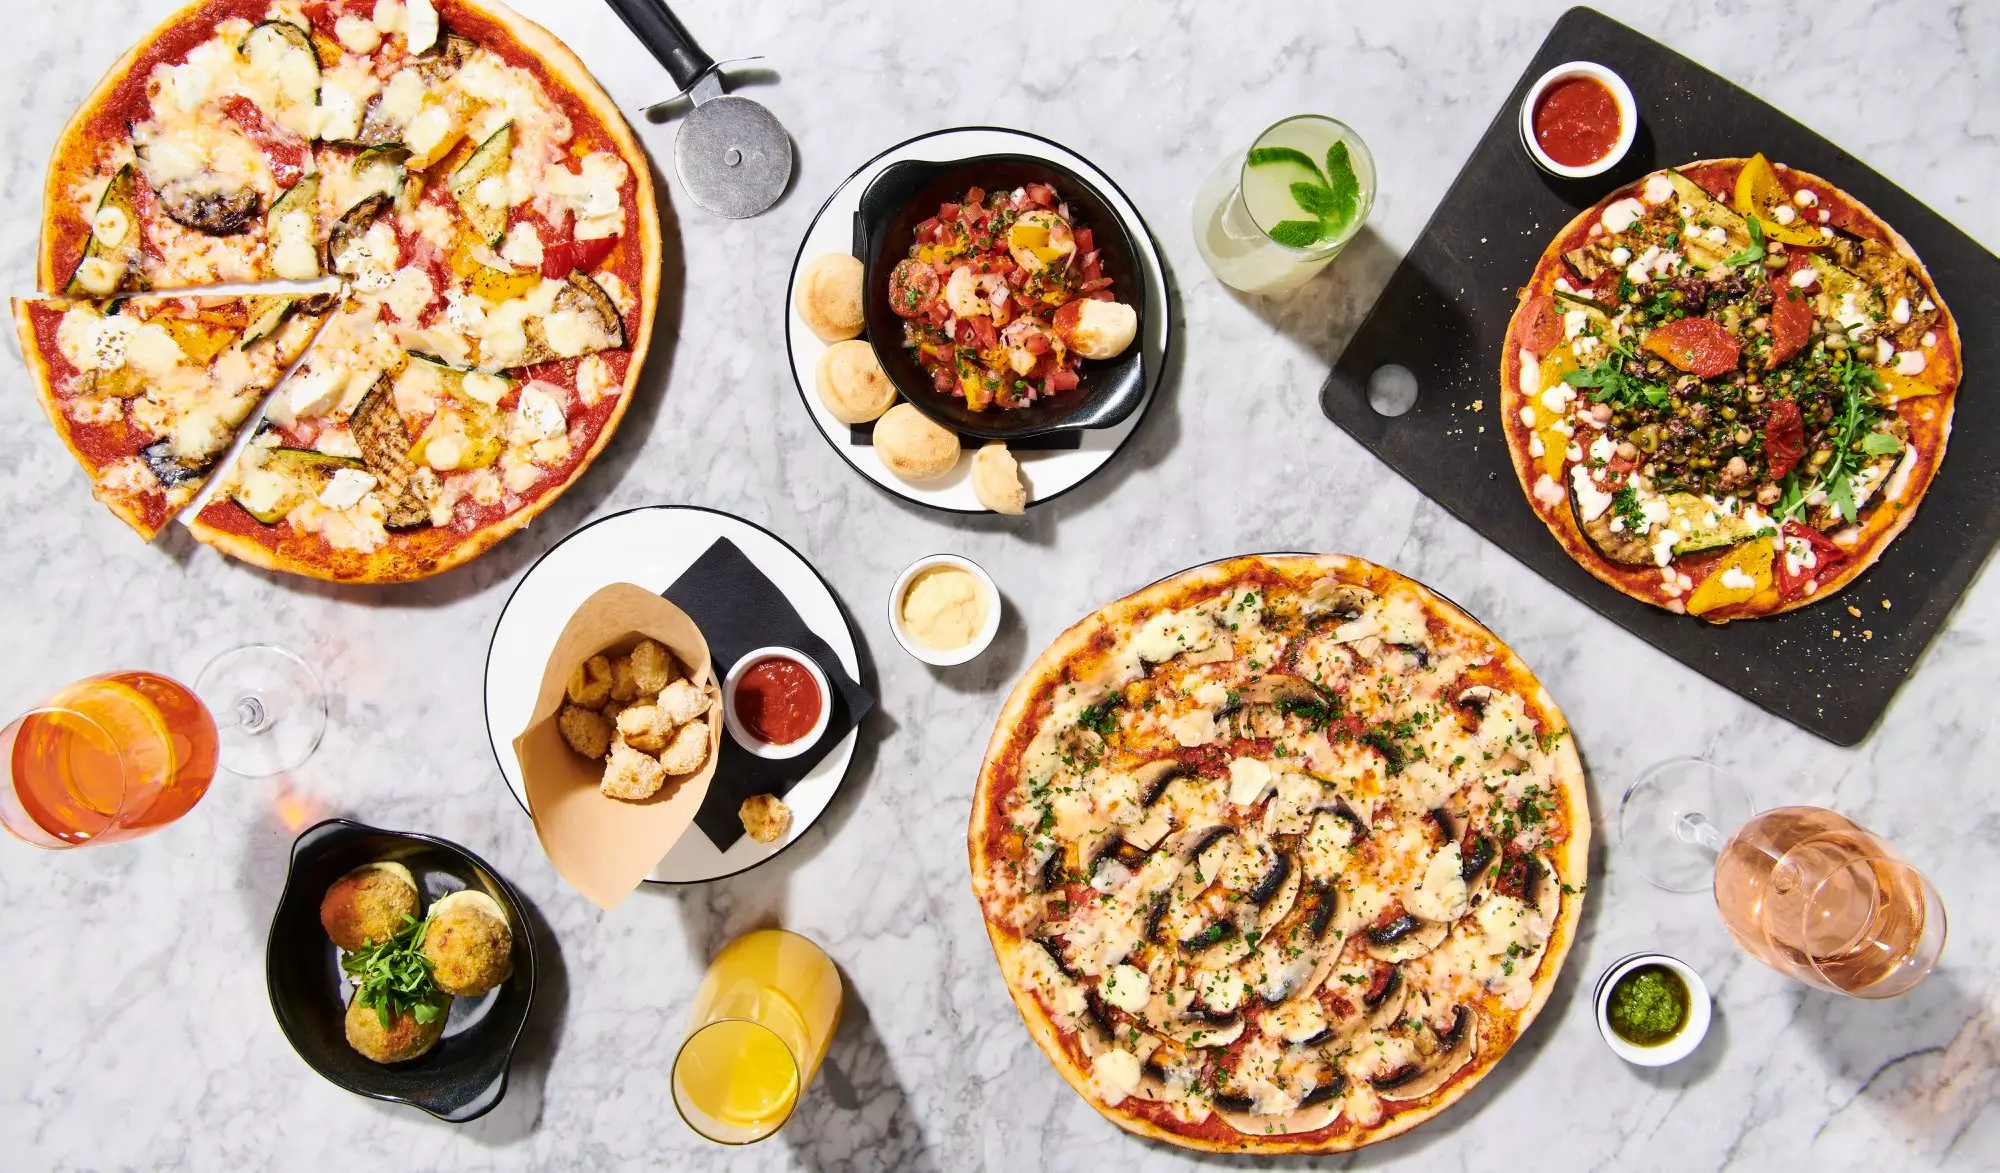 PizzaExpress is reportedly preparing for debt talks with its creditors.